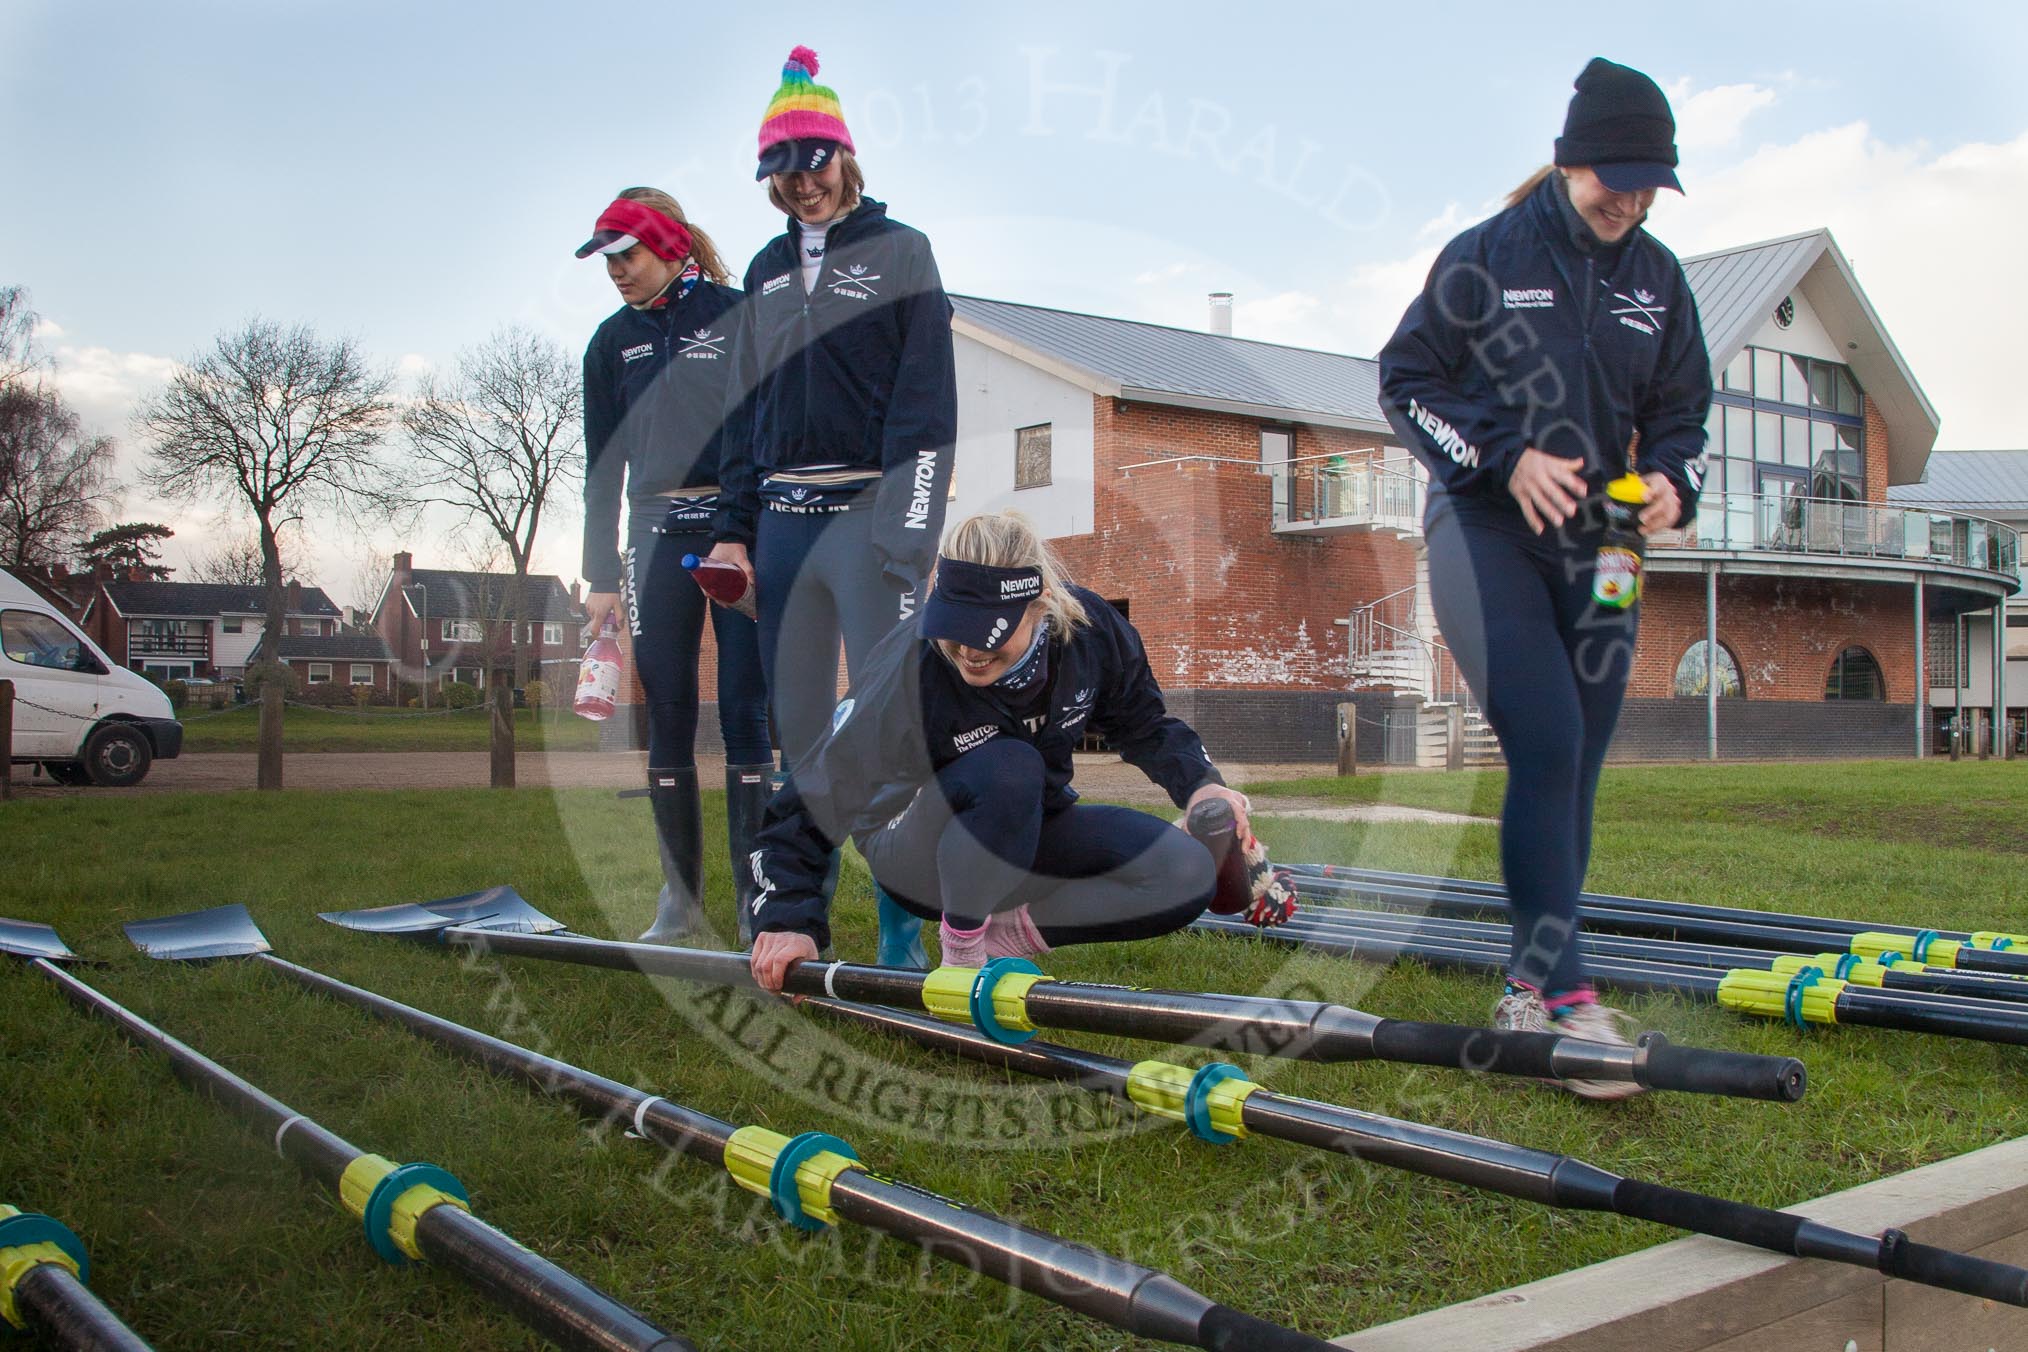 The Boat Race season 2013 - OUWBC training: At the Oxford University Fleming Boathouse inspecting the oars for the training session - Maxie Scheske, Alice Carrington-Windo, Amy Varney and Mary Foord-Weston..
Fleming Boathouse,
Wallingford,
Oxfordshire,
United Kingdom,
on 13 March 2013 at 16:25, image #7